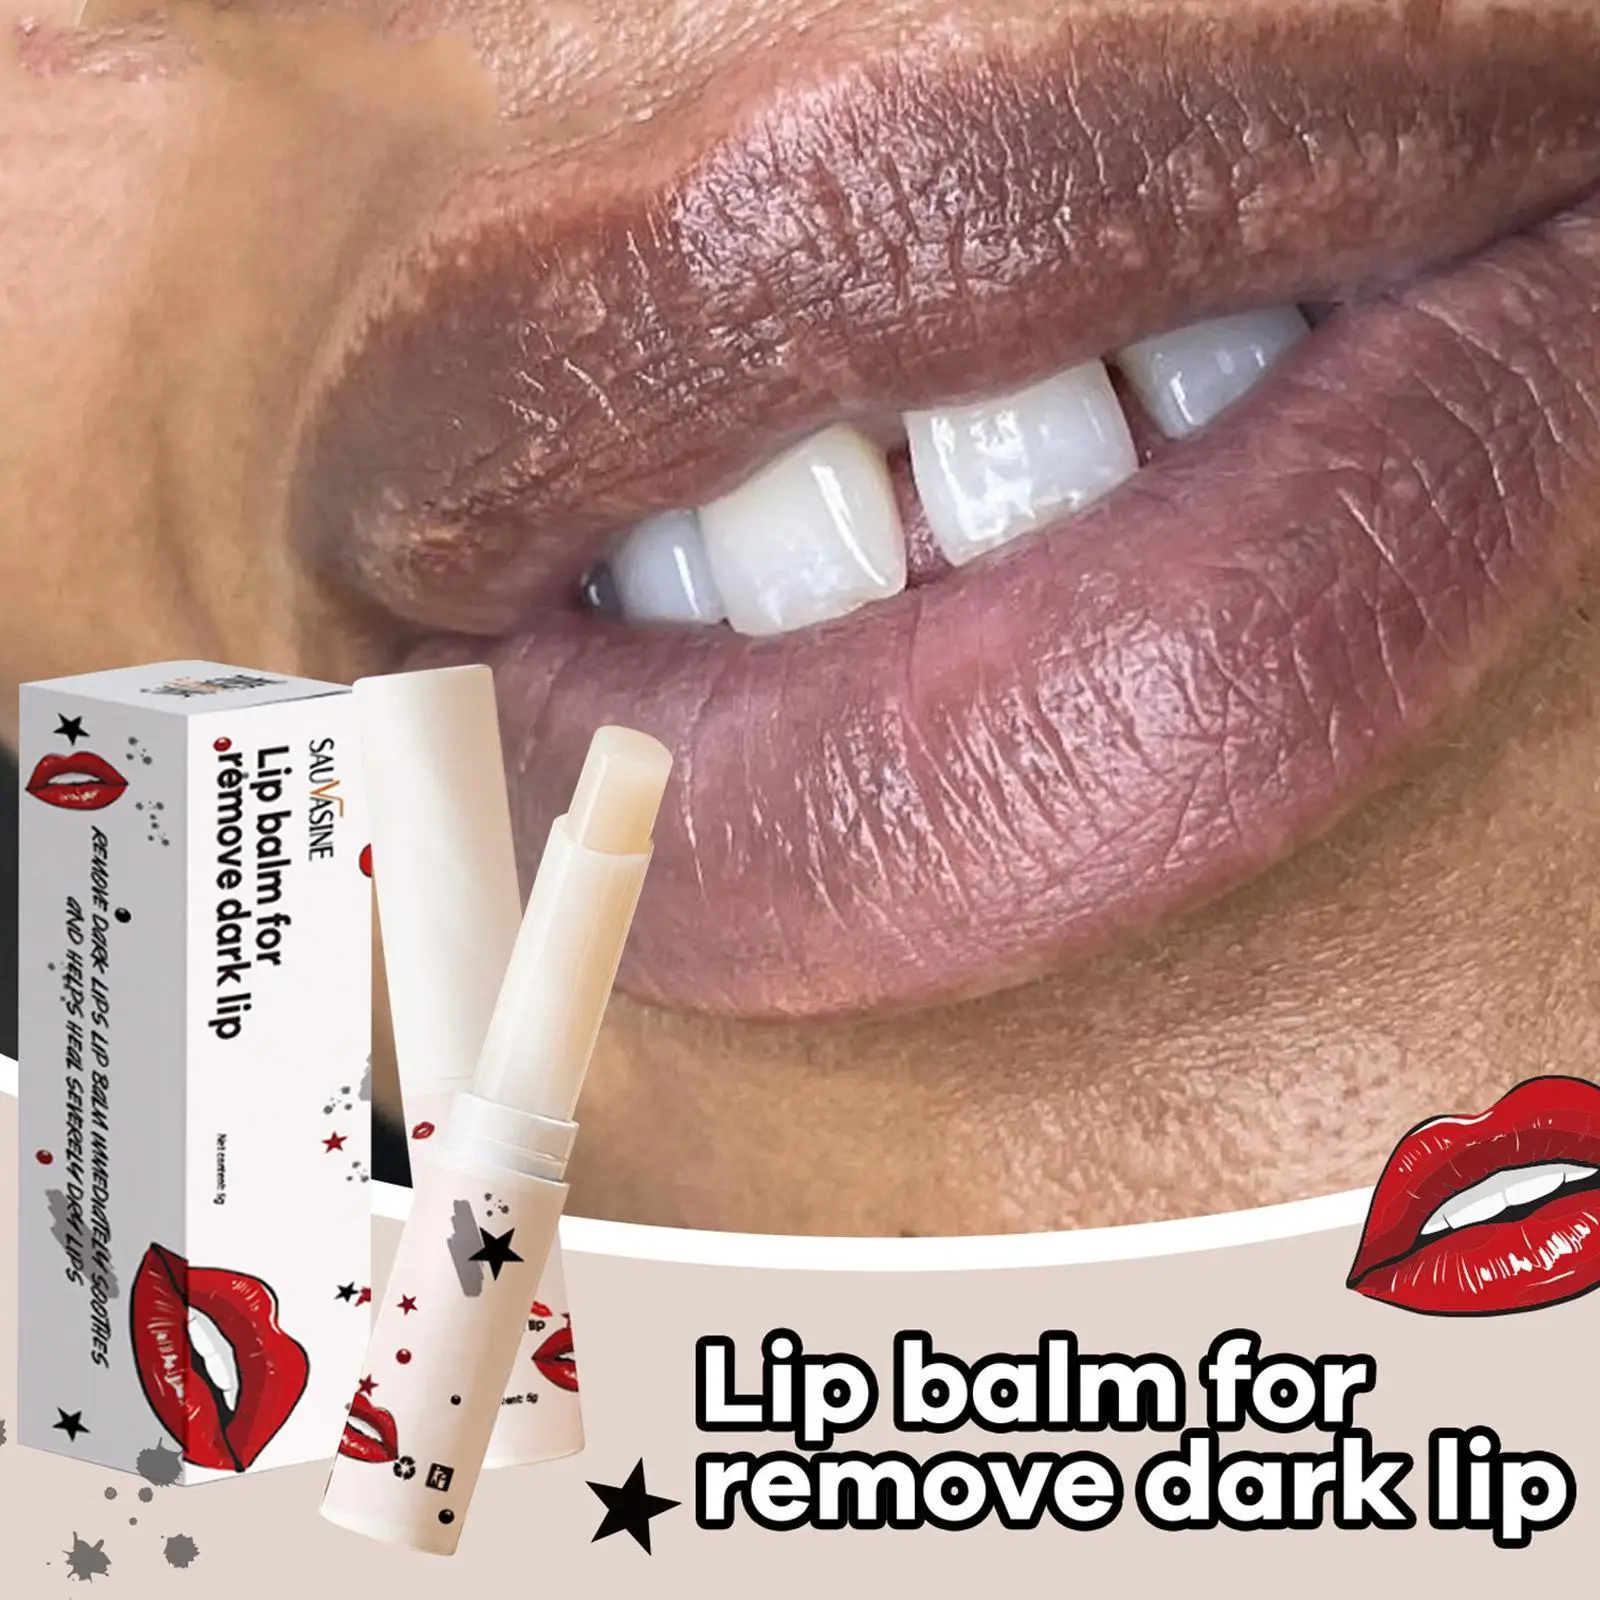 

Pure Natural Lip Whitening Lightening Bleaching Black on Care Uneven Darkness Lips Eliminate Balm Removal Treatment U3E5